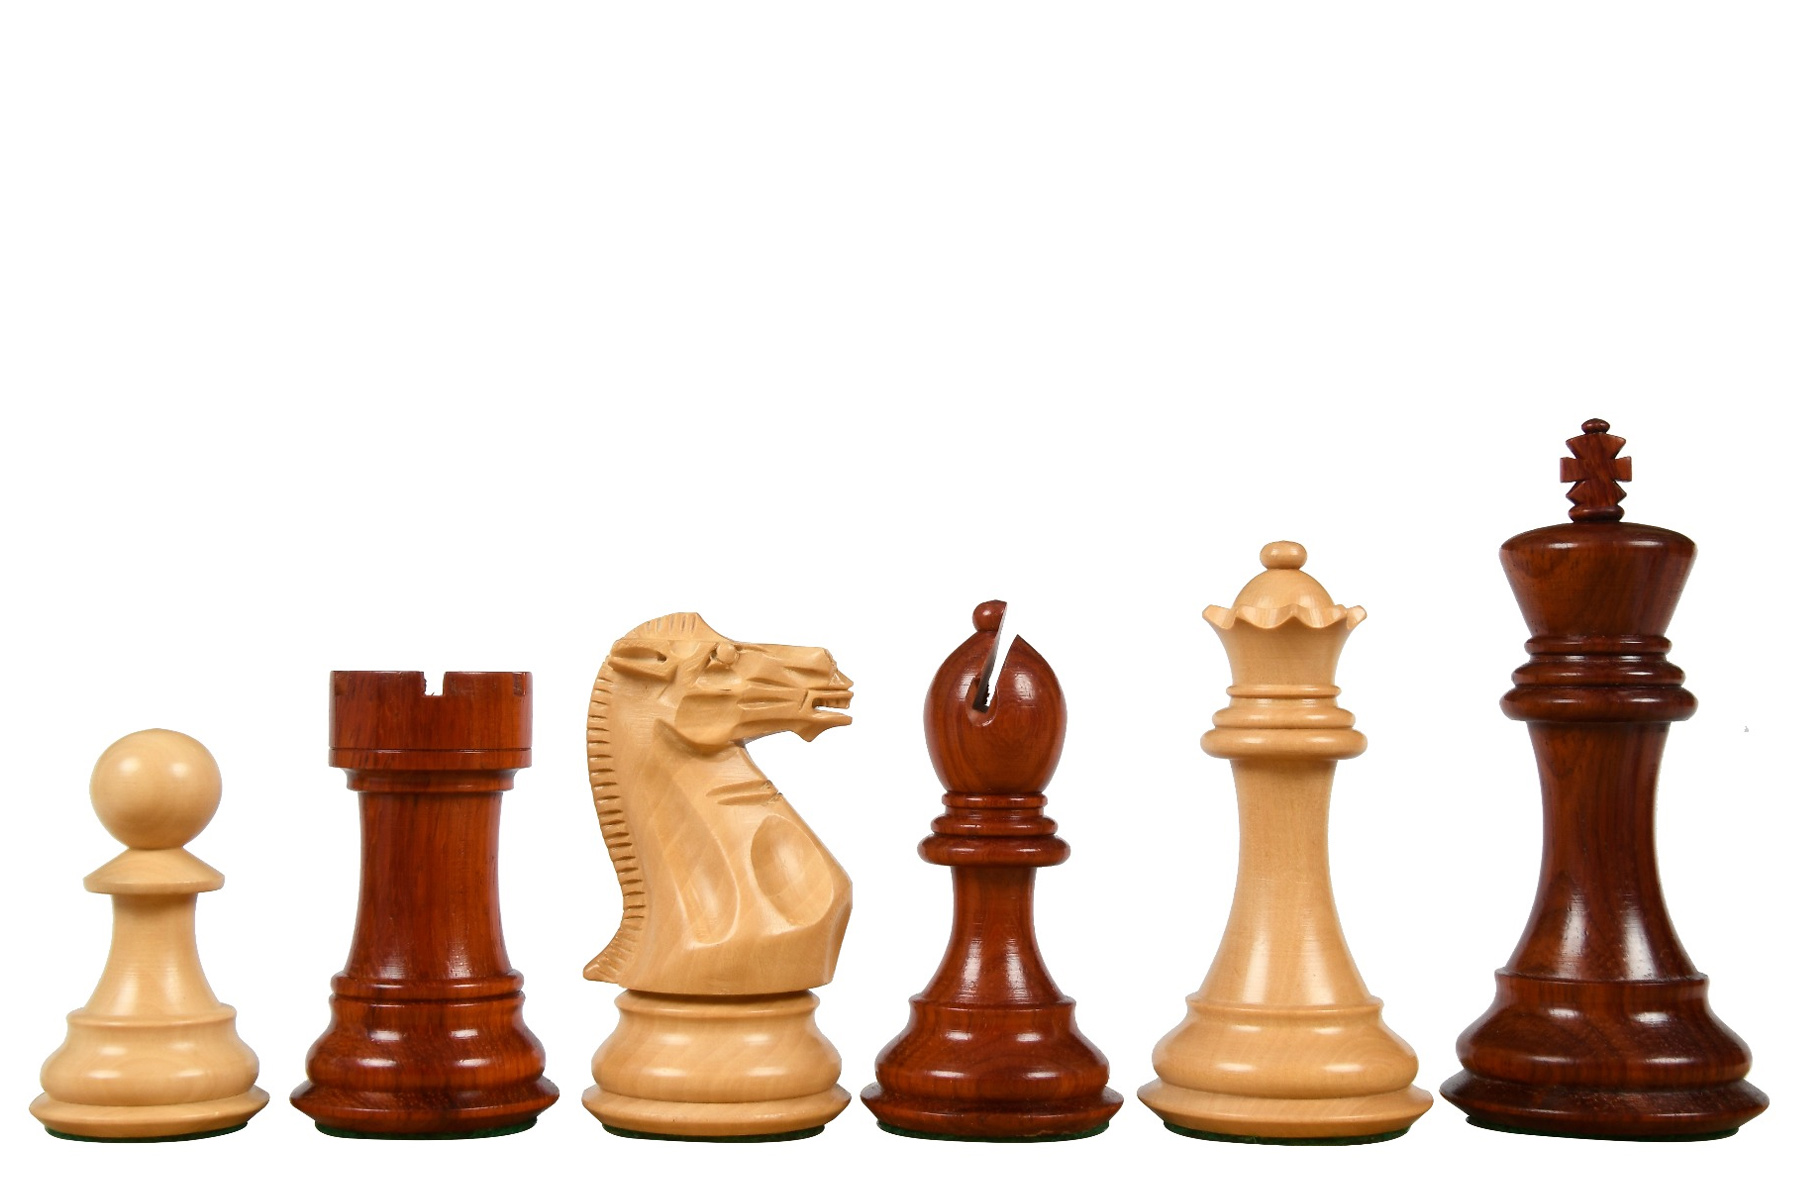 Bud Rose wood Galaxy Staunton Wooden Chess Set Pieces Size 3" with Board Box 